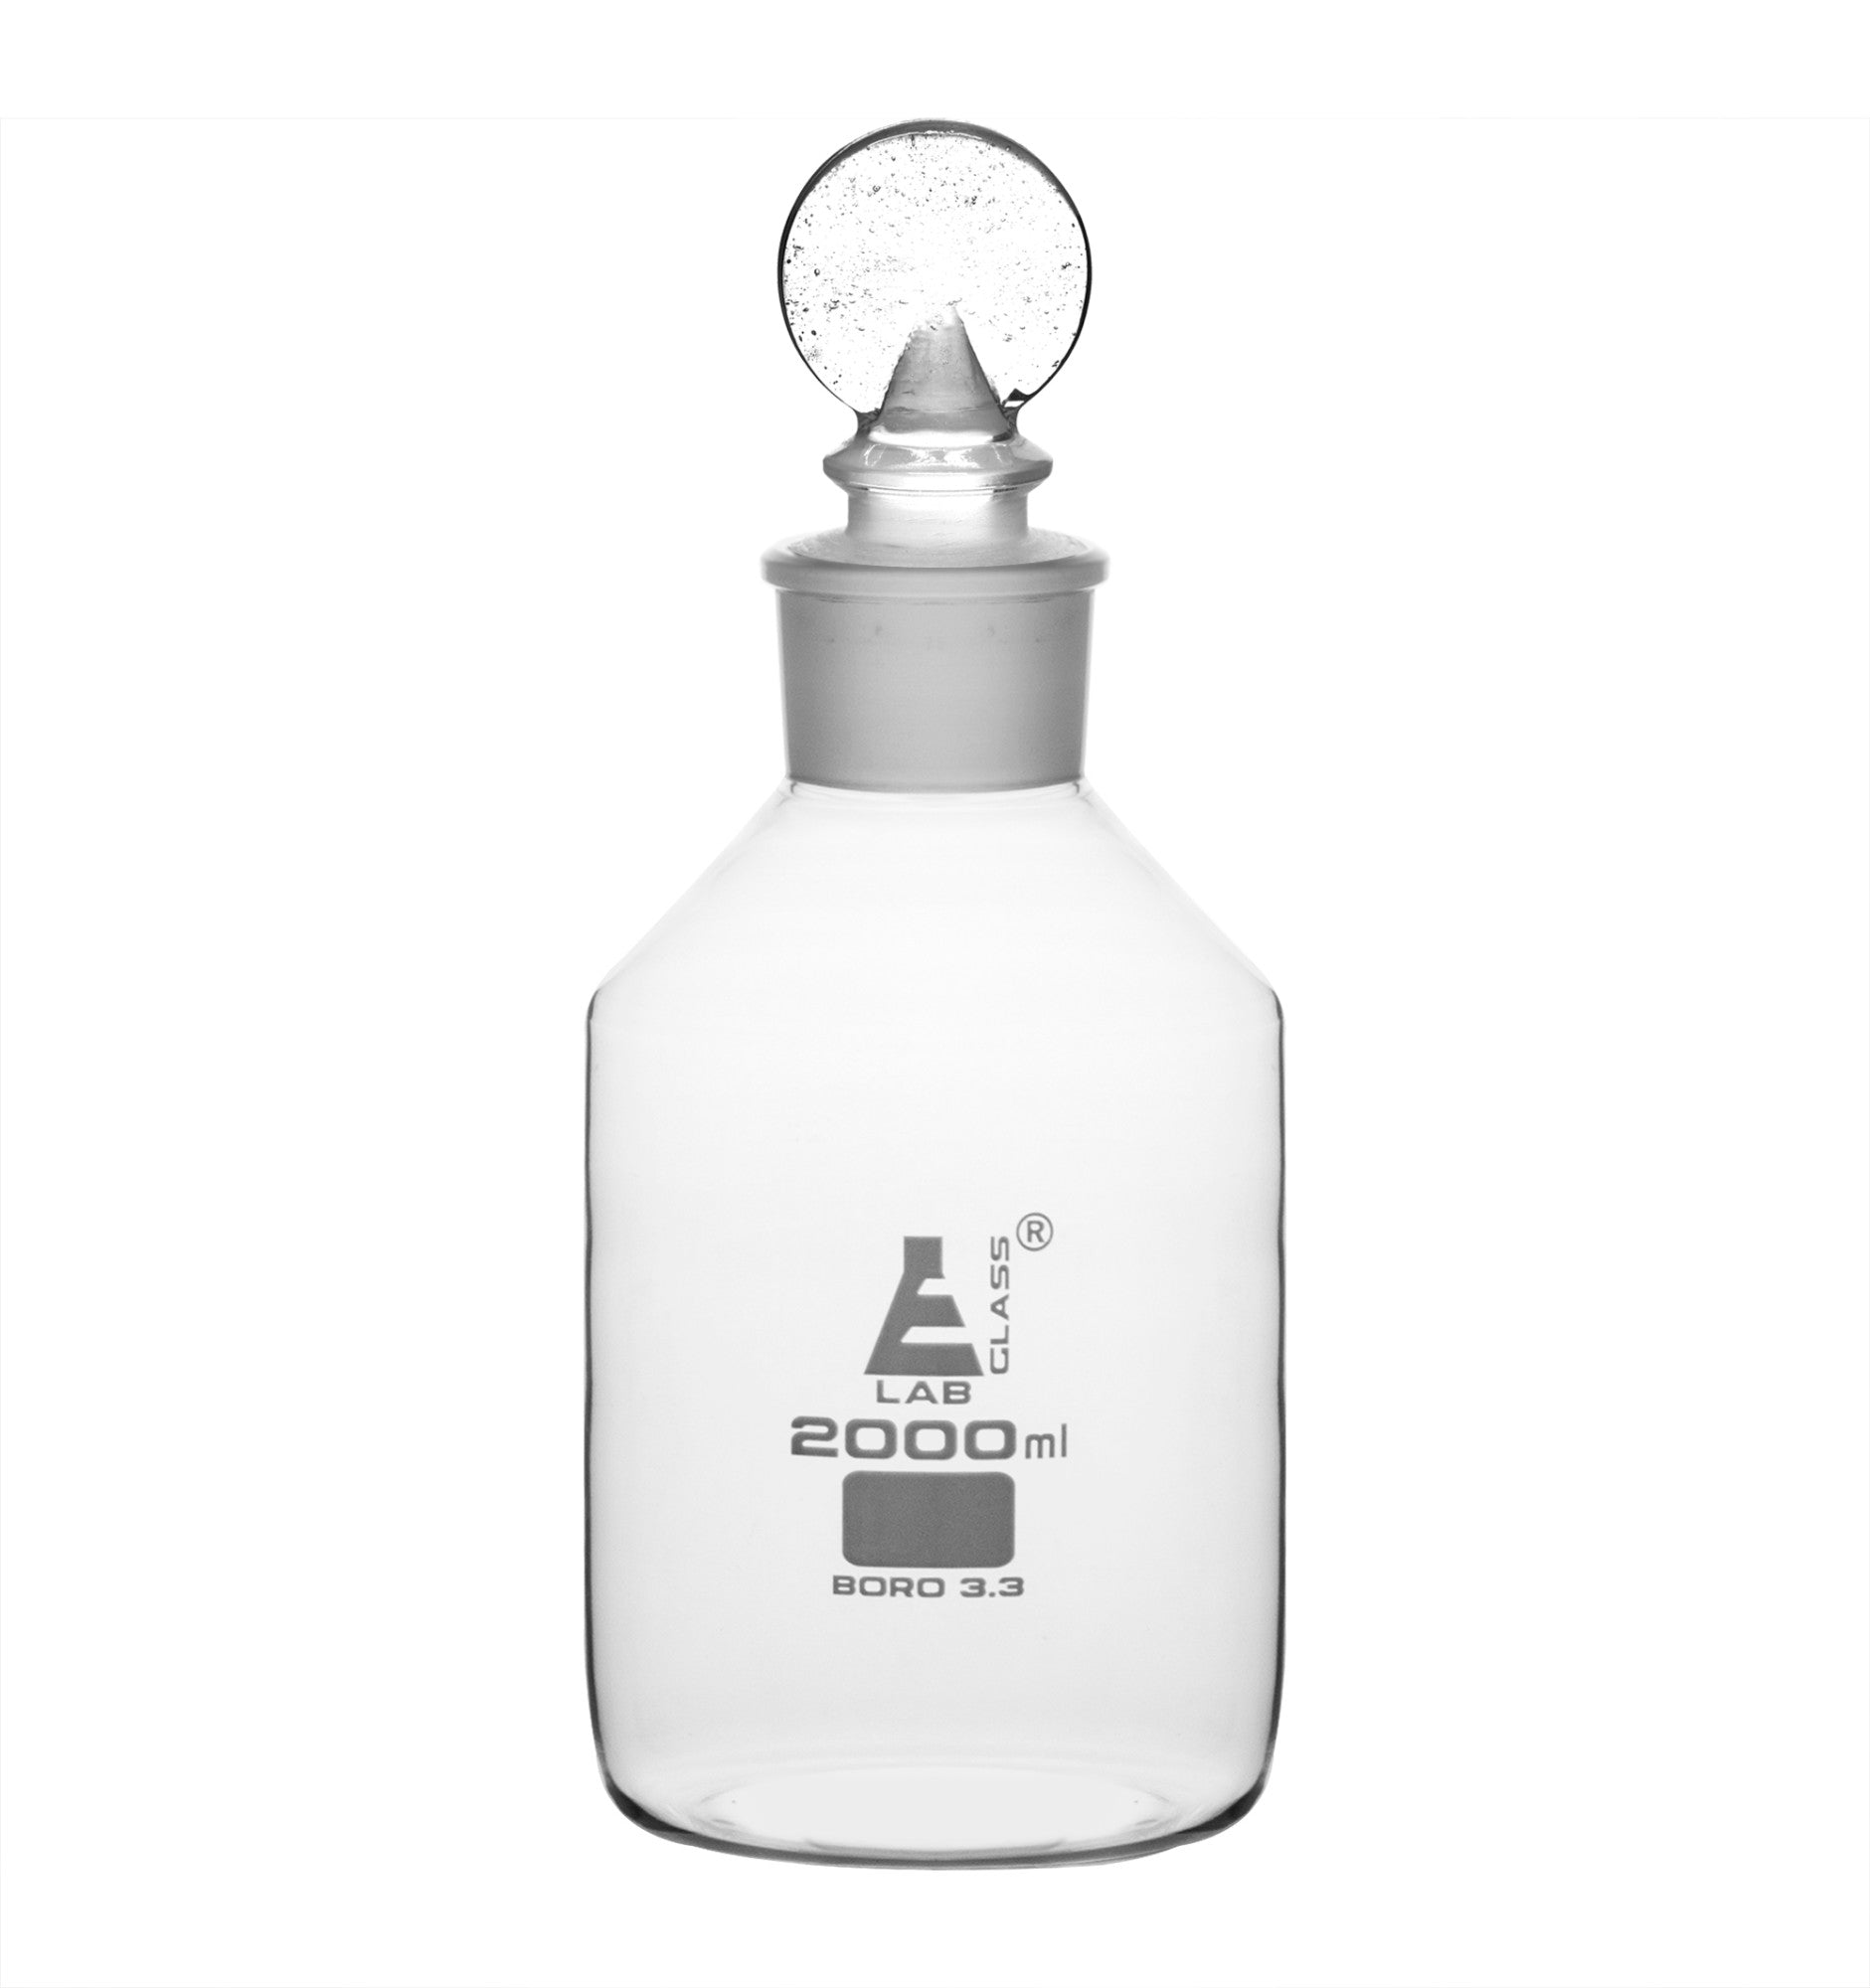 Clear Borosilicate Glass Reagent Bottle with Hollow Glass Stopper, 2000 ml, Wide Mouth, Autoclavable